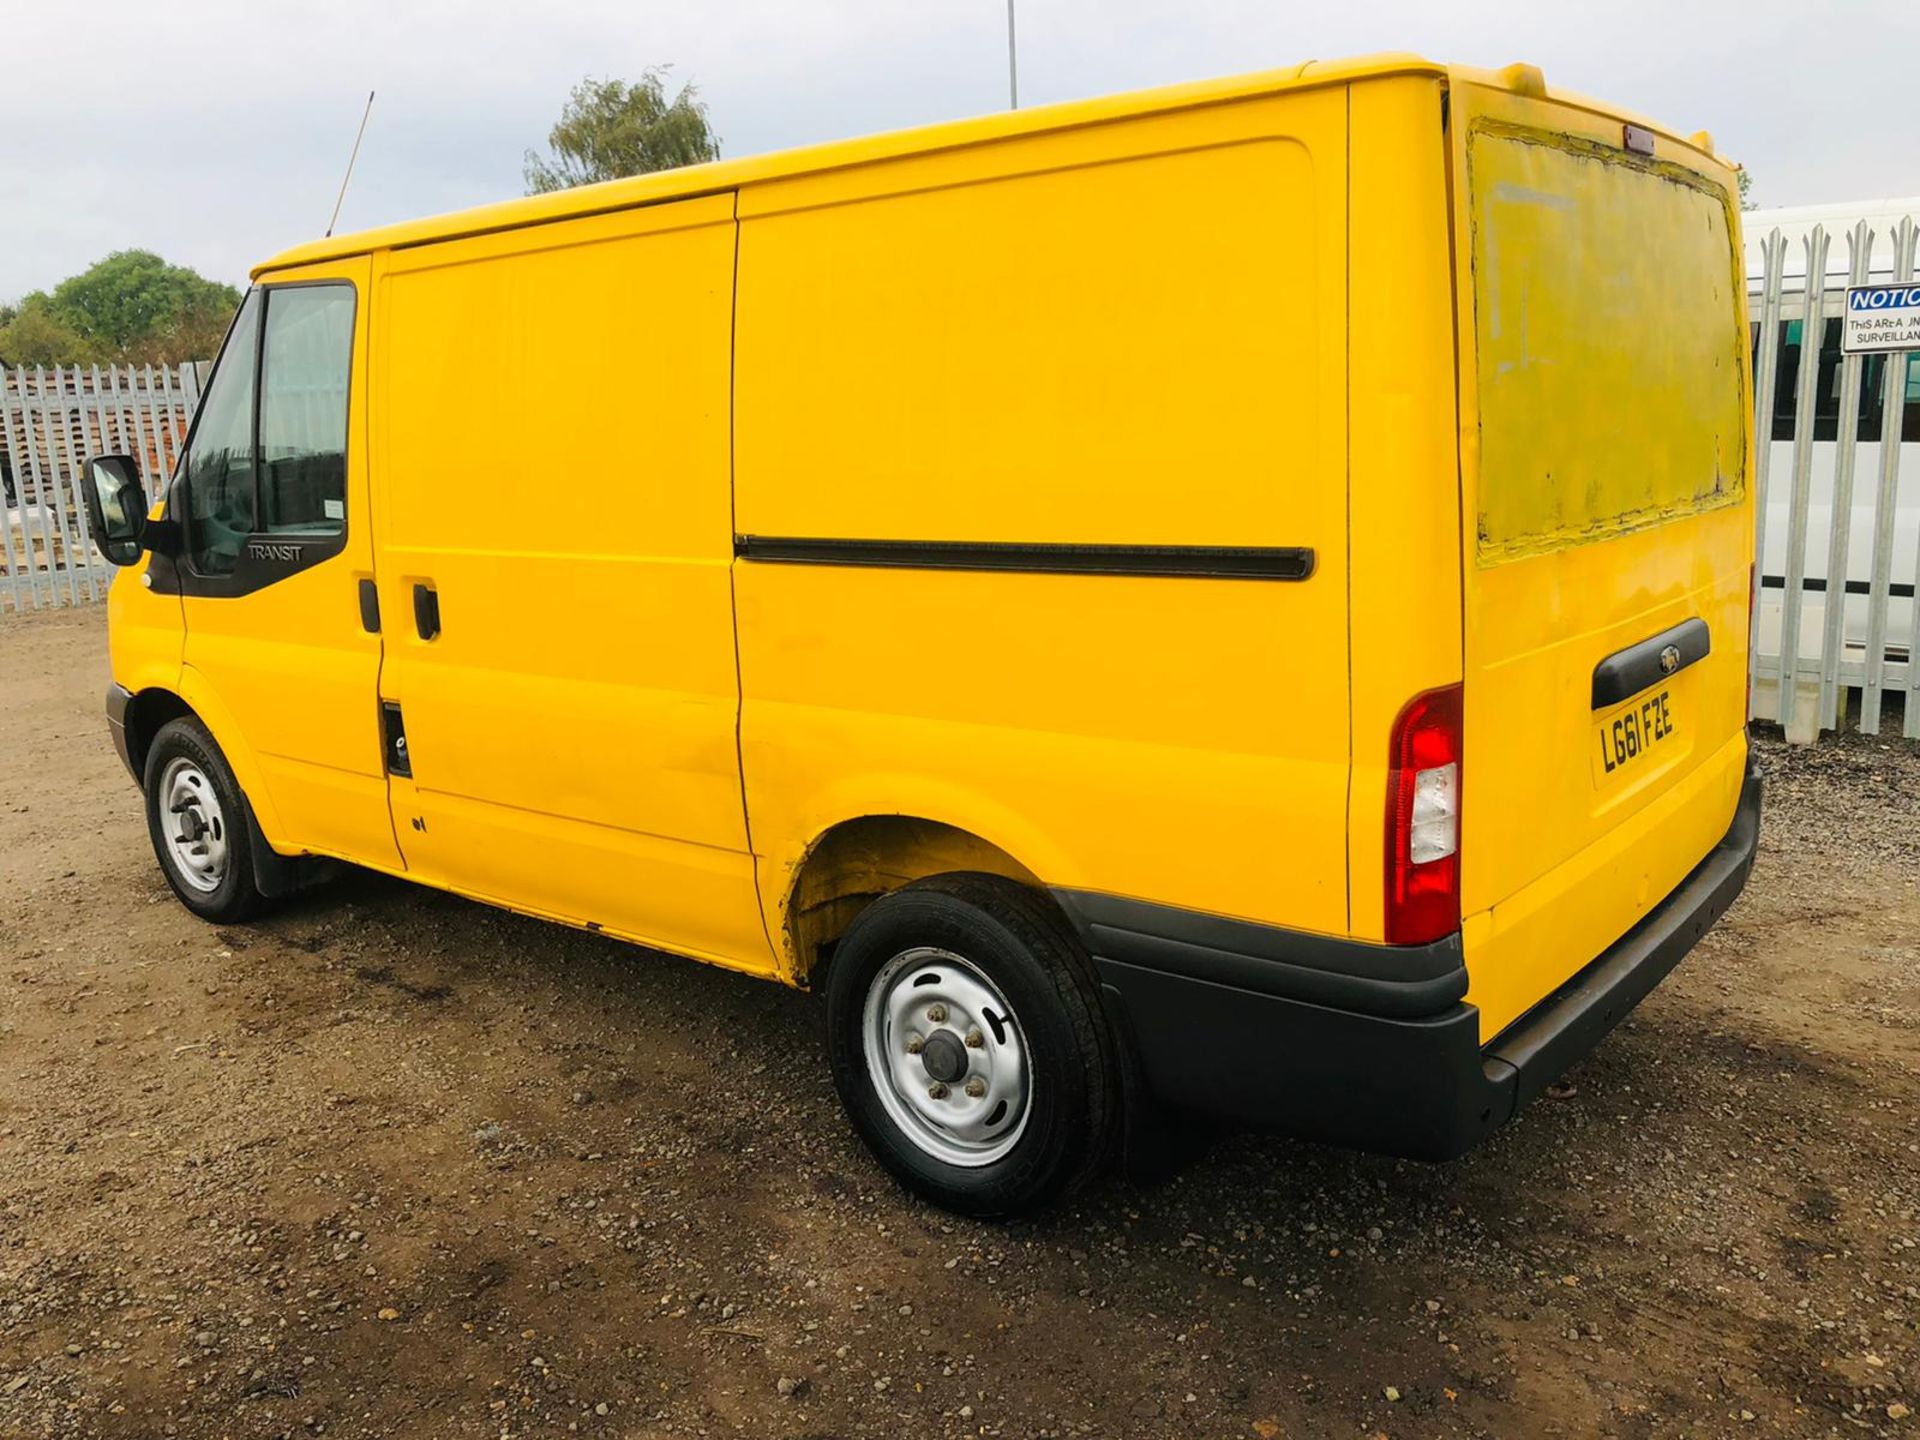 Ford Transit 2.2 TDCI 125 T300 L1 H1 FWD 2011 '61 Reg' Air Con - Elec Pack - No Vat Save 20% - Image 9 of 32